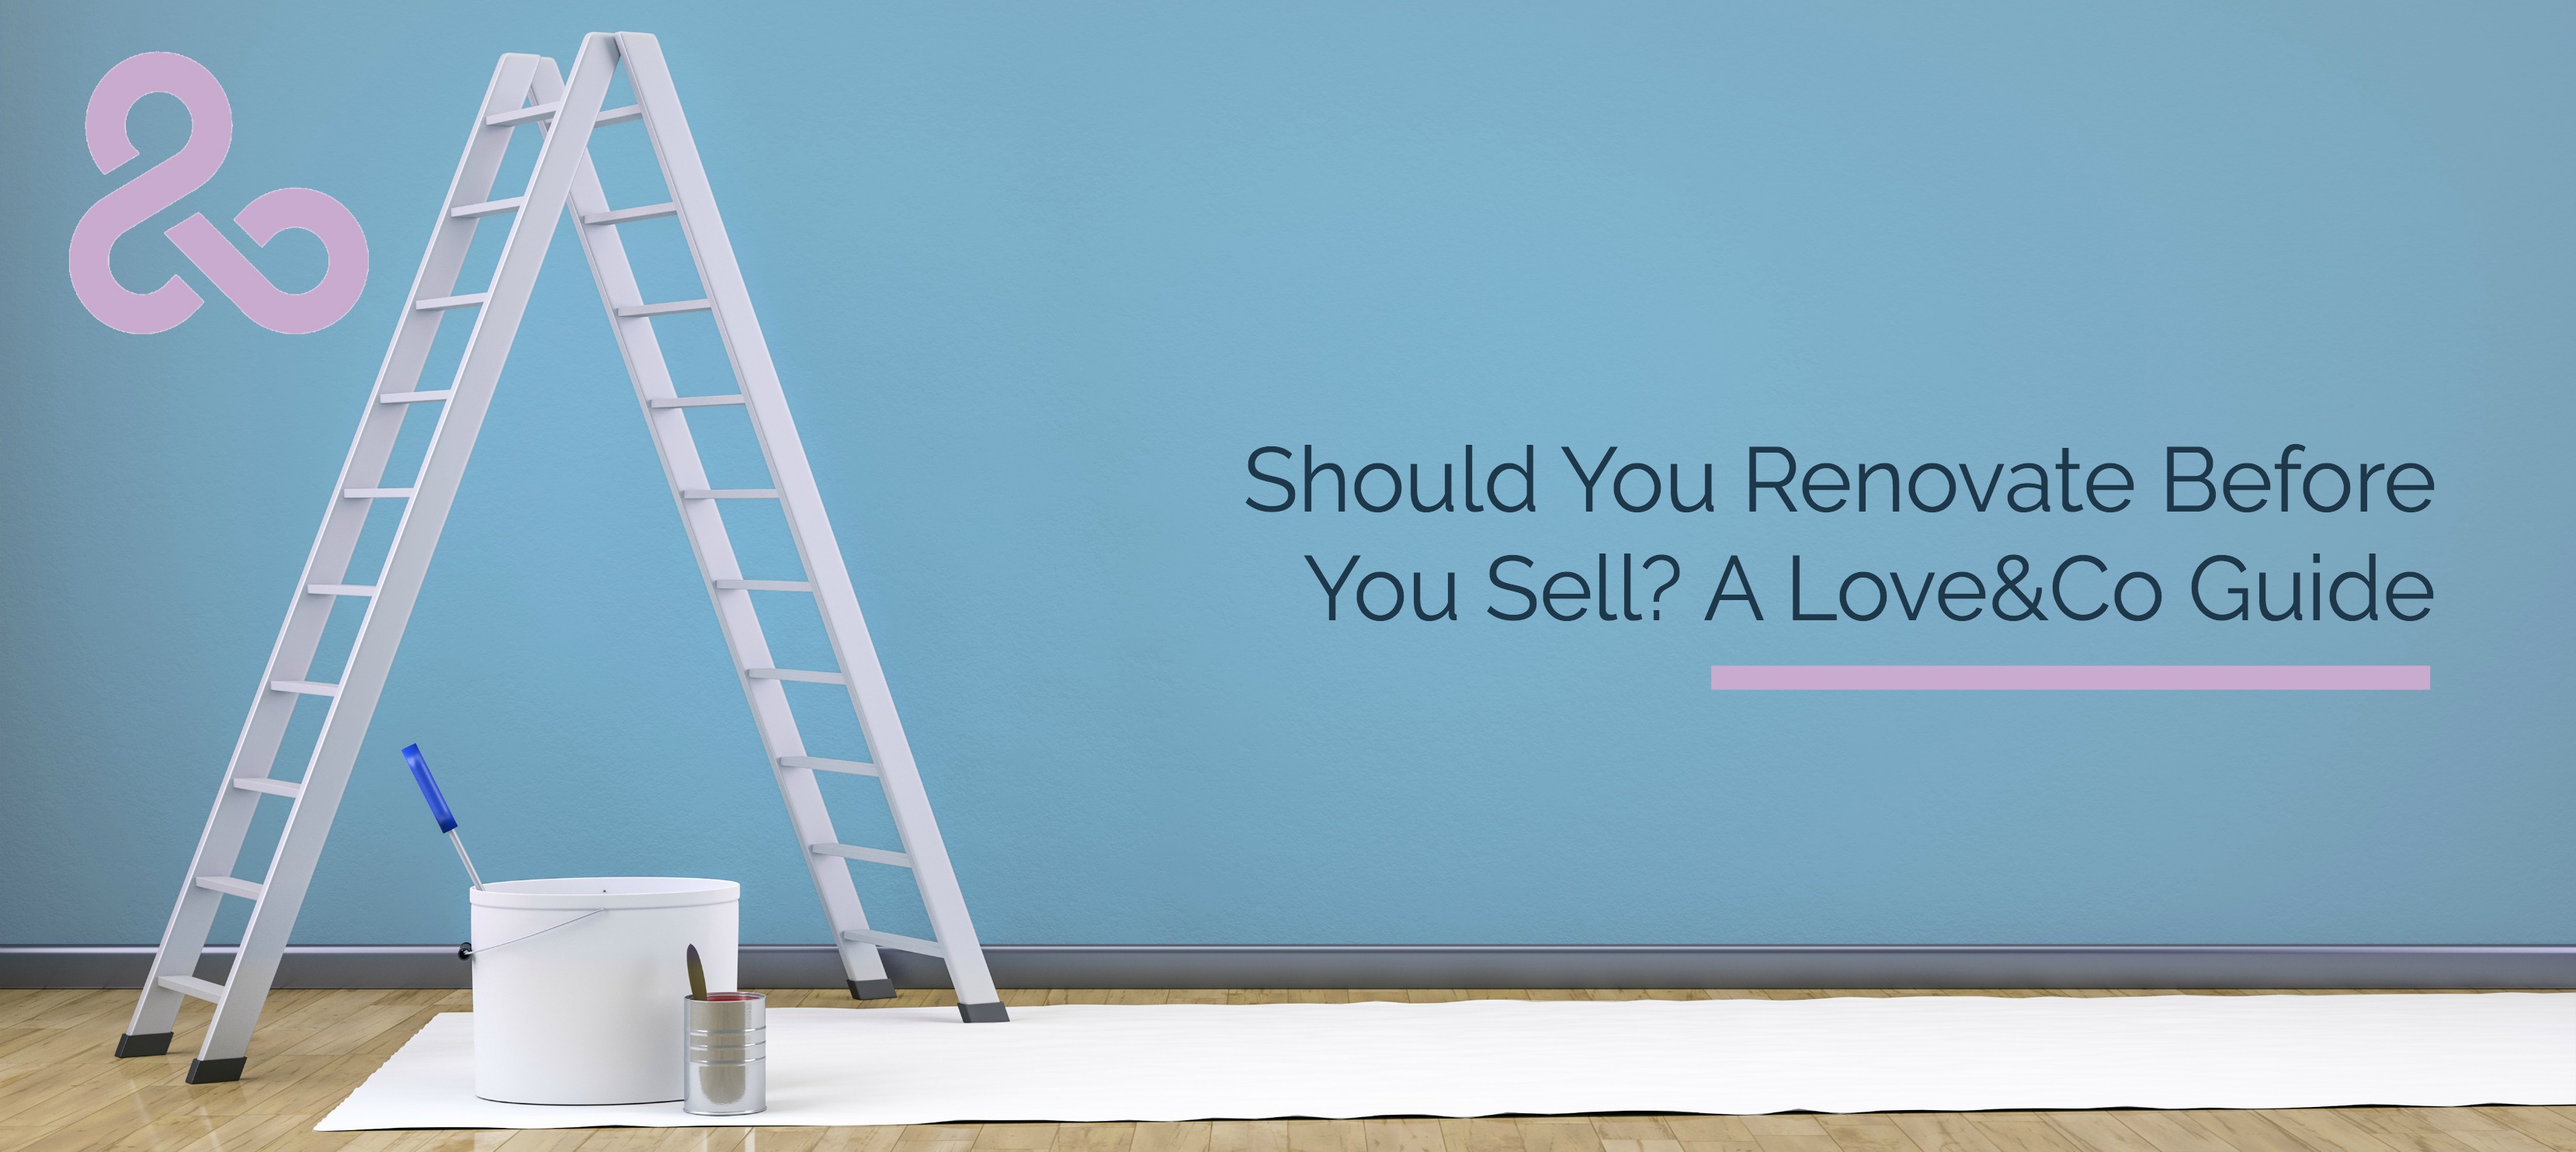 Should You Renovate Before You Sell? A Love&Co Guide